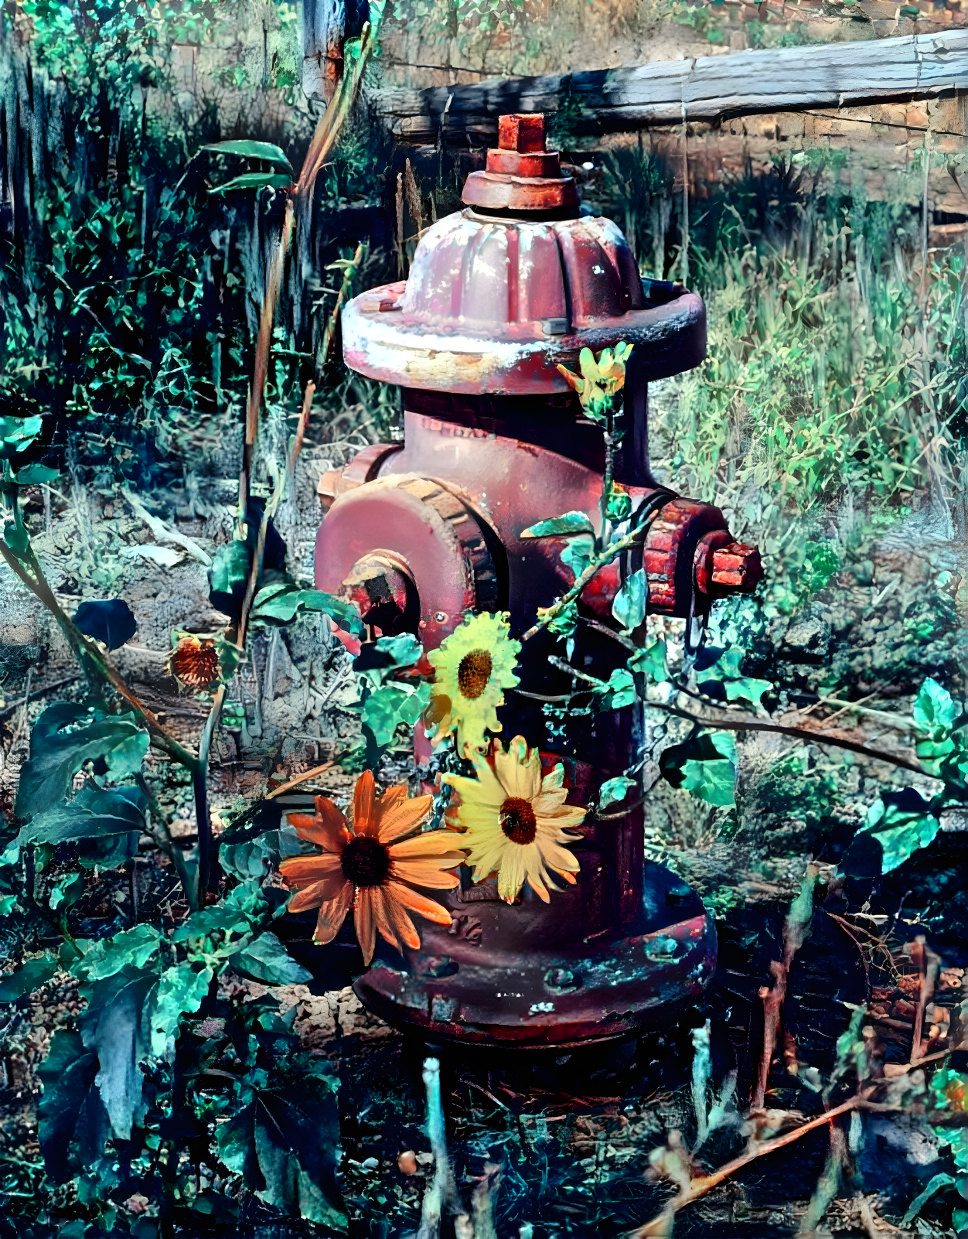 Fire hydrant and sunflowers